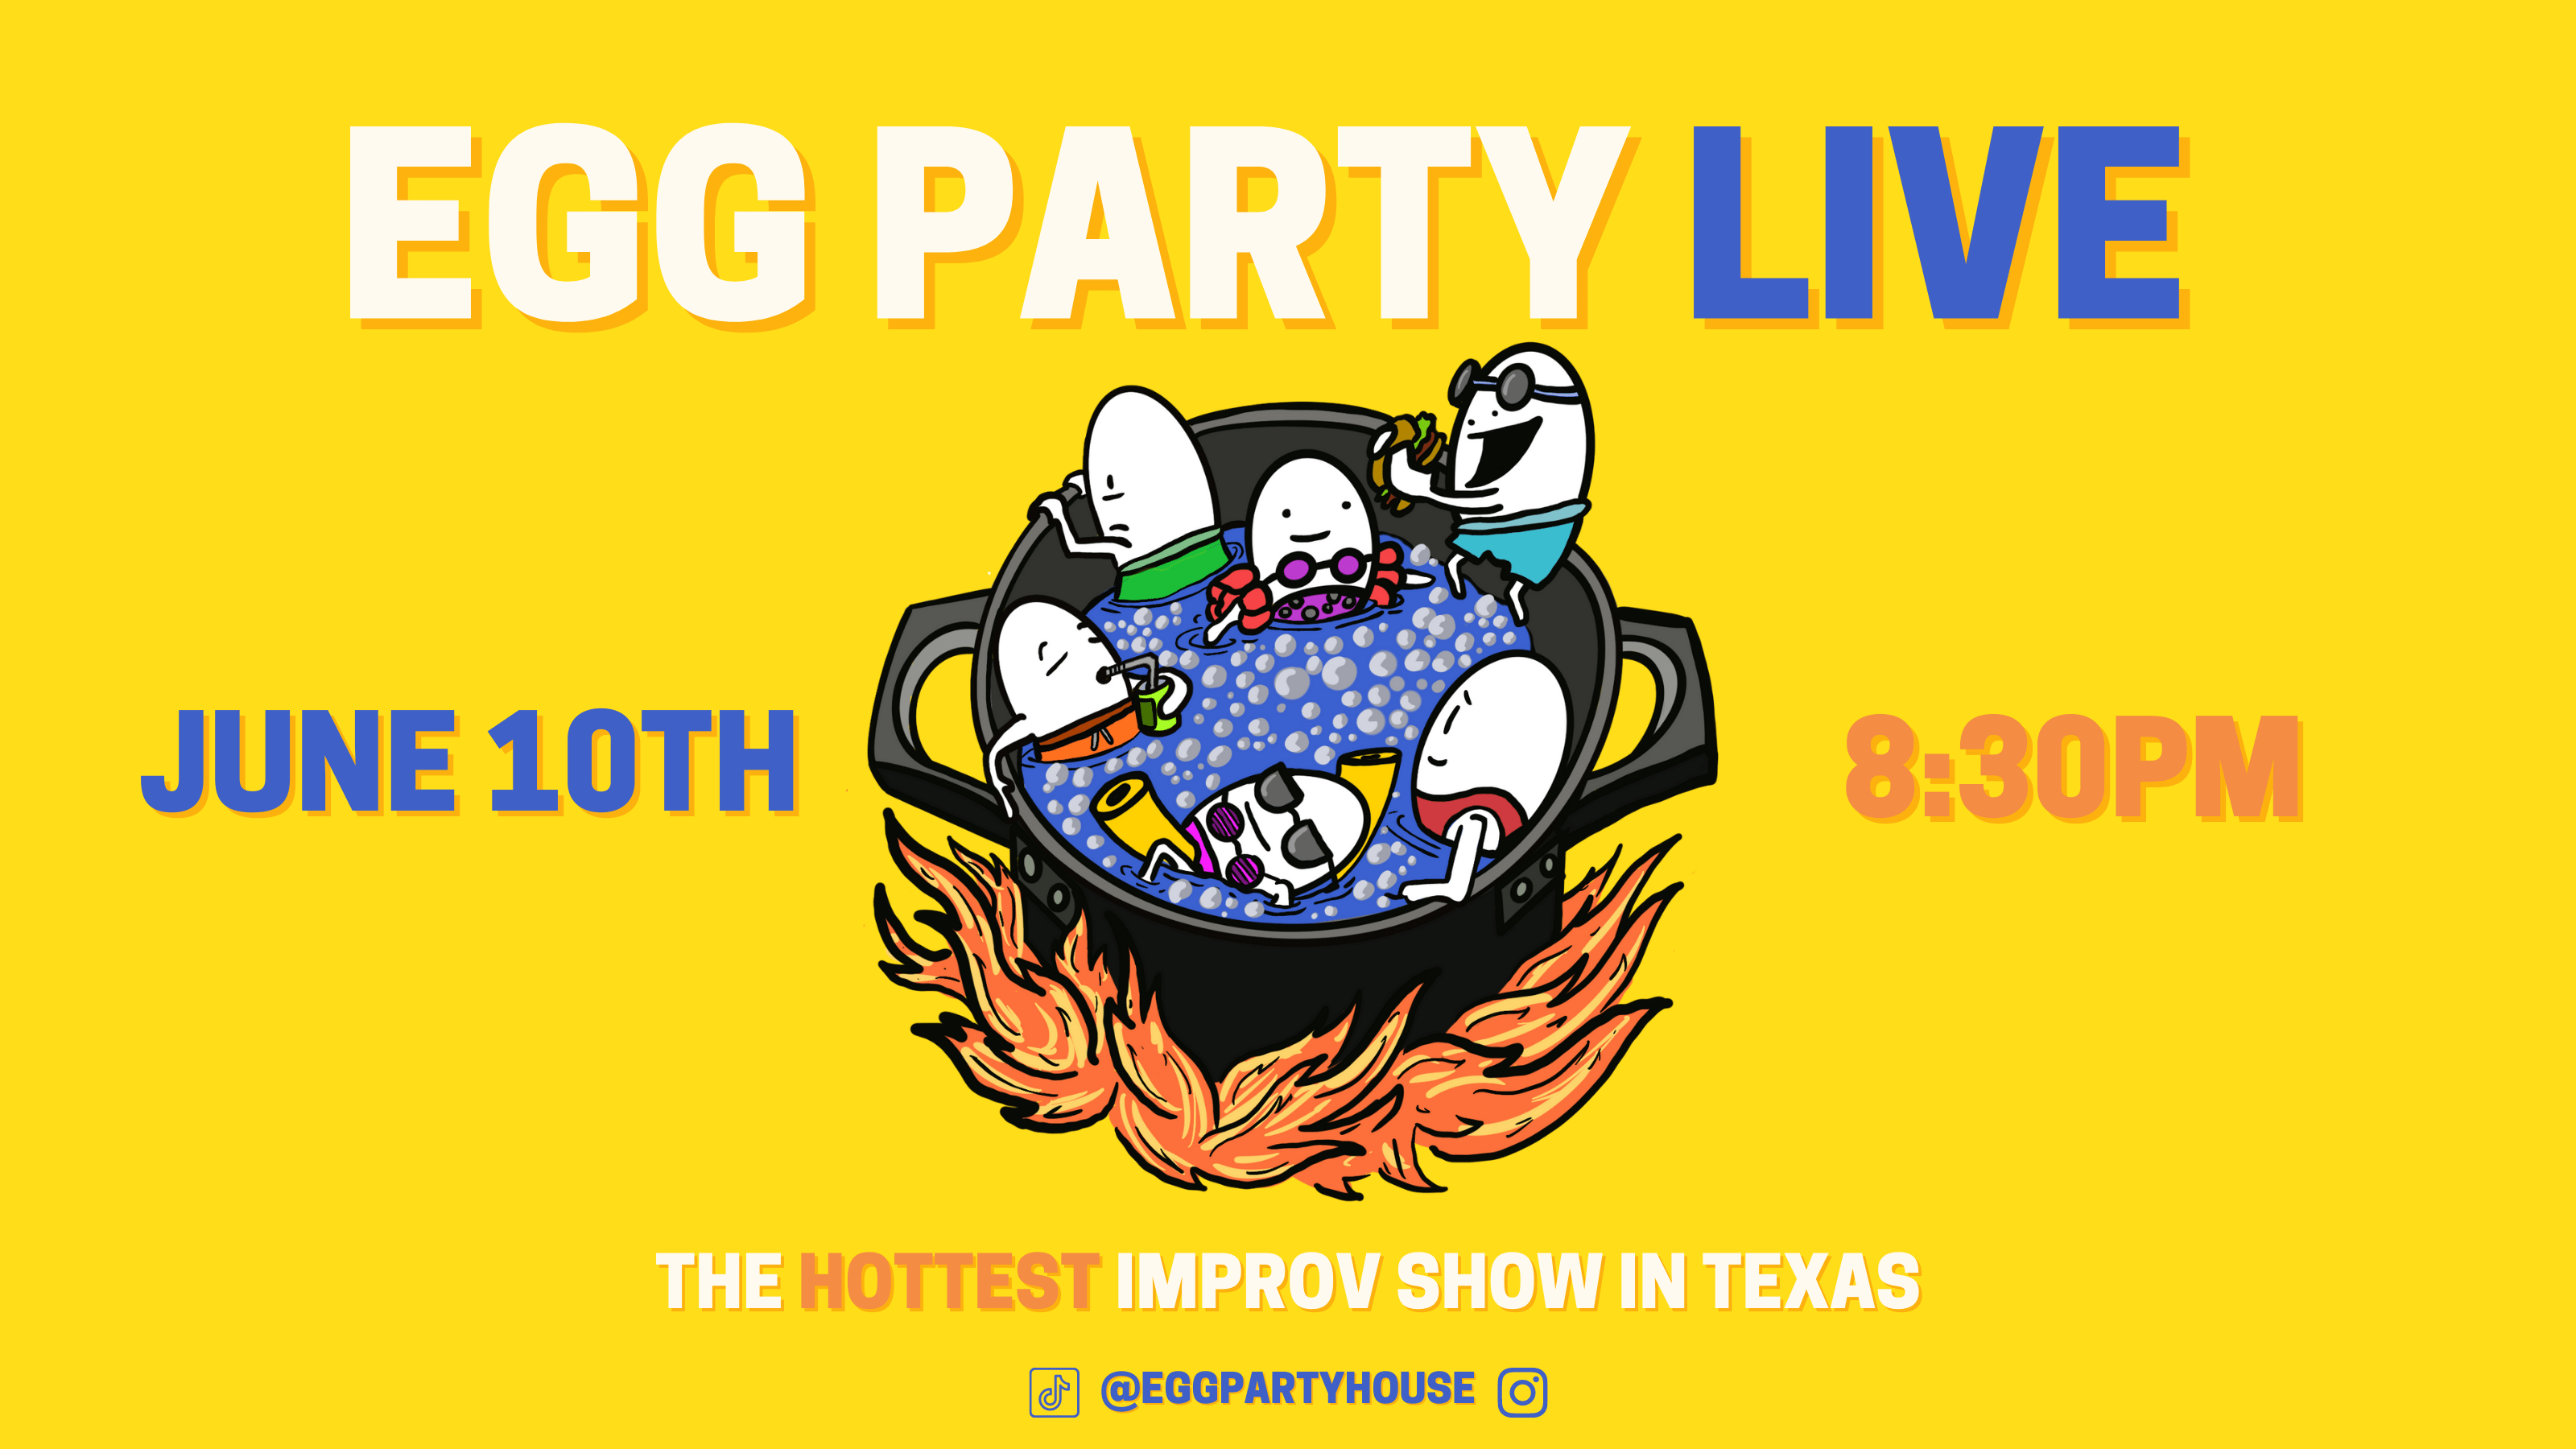 Egg Party Live